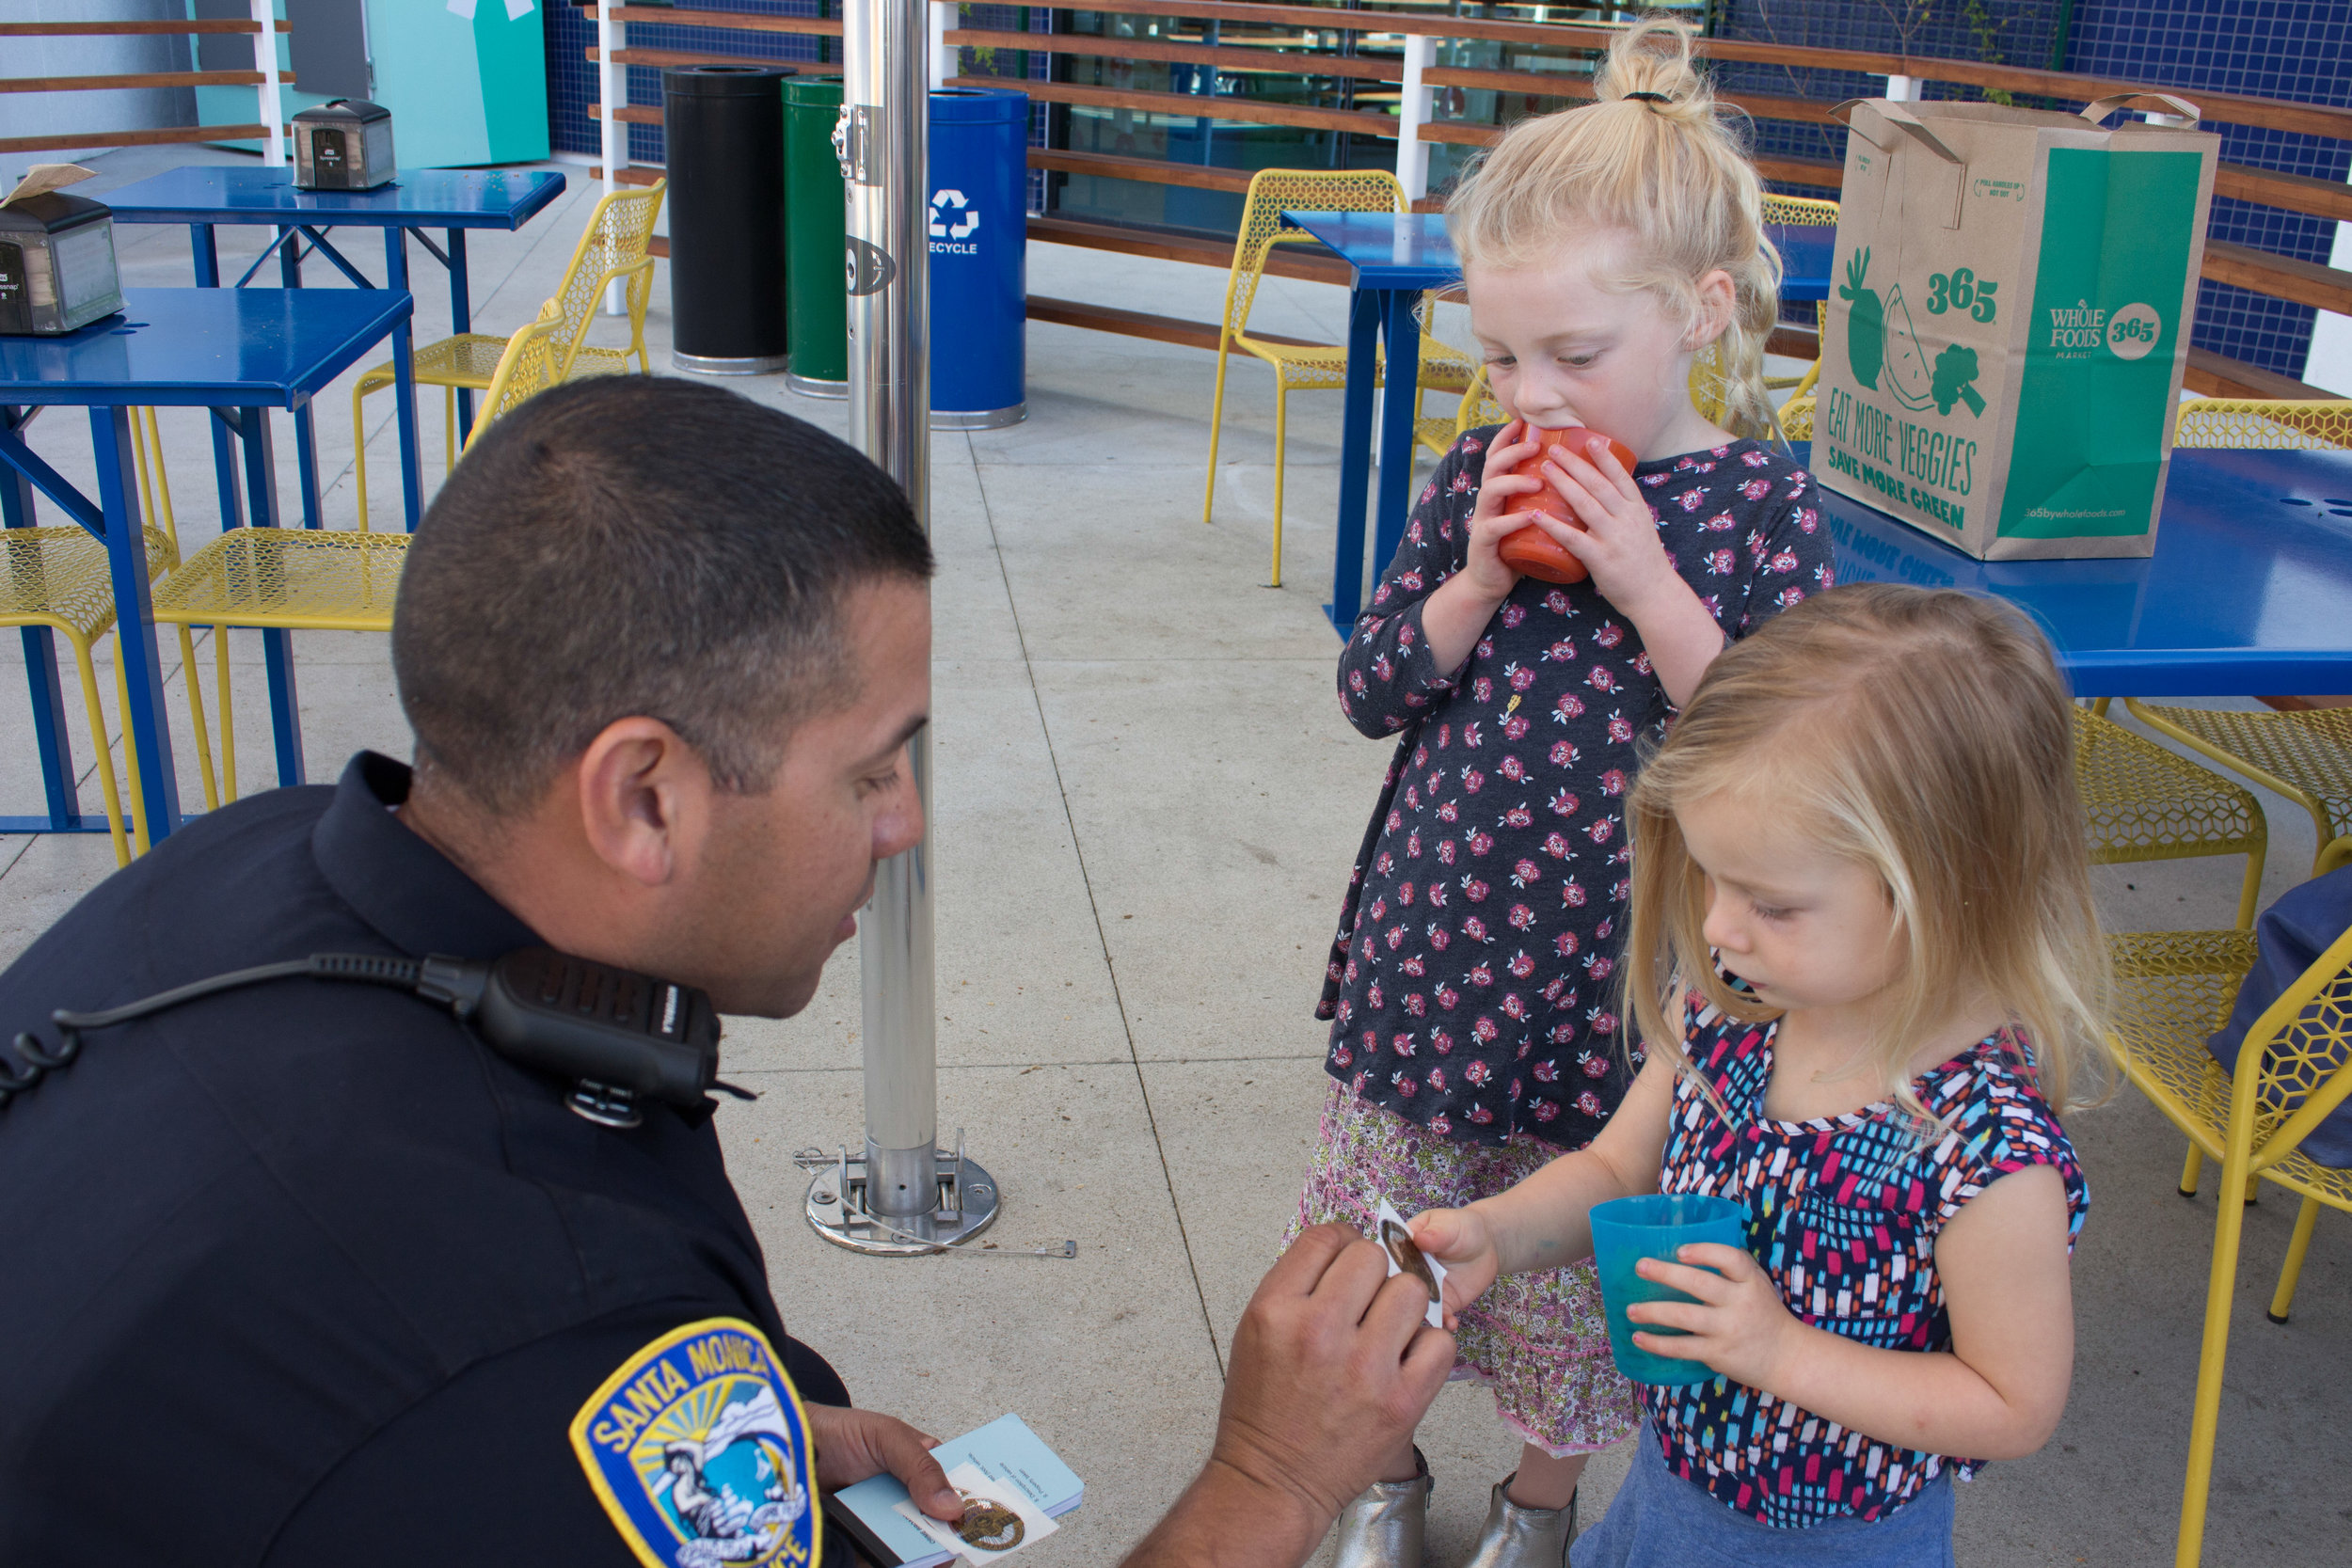  Officer Gustavo Cortez (left) gives two year old Sienna Robertson (right) a Police Helper sticker during National Coffee with a Cop Day held at Groundwork on Wednesday, October 4, 2017, in Santa Monica, Calif. This event began in 2011 to help promot